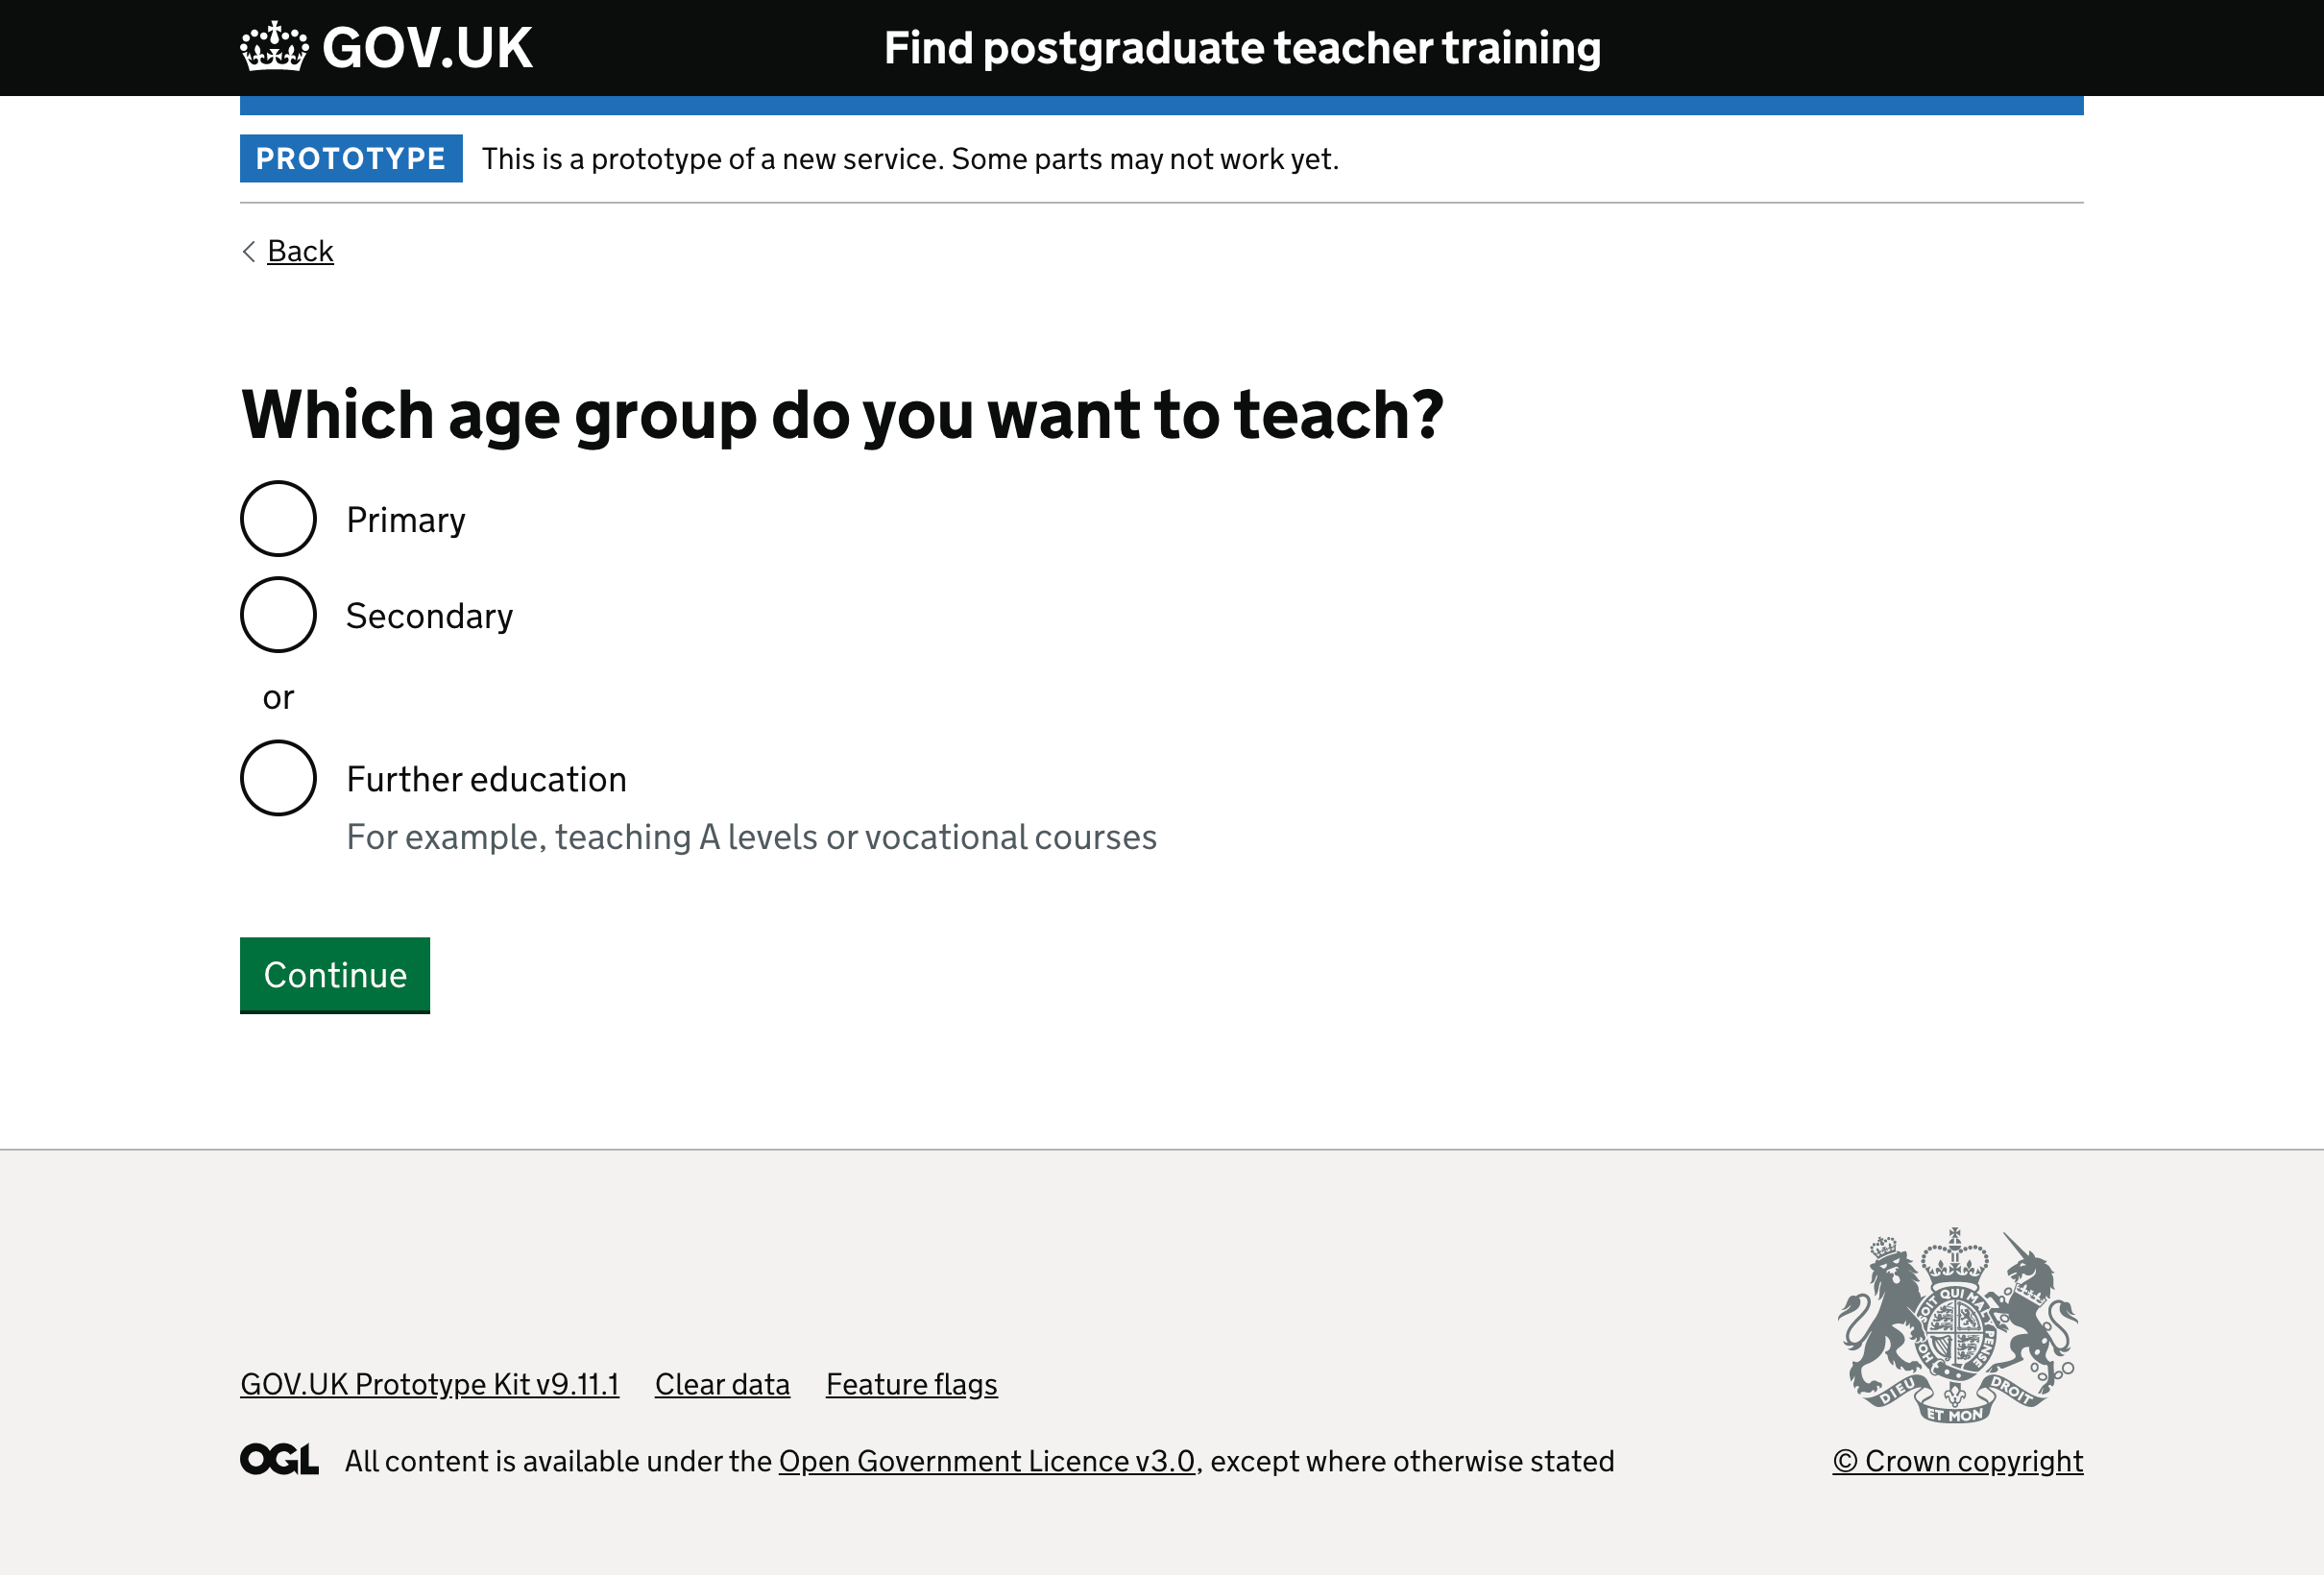 Screenshot of new page askind users what age group they are interested in teaching